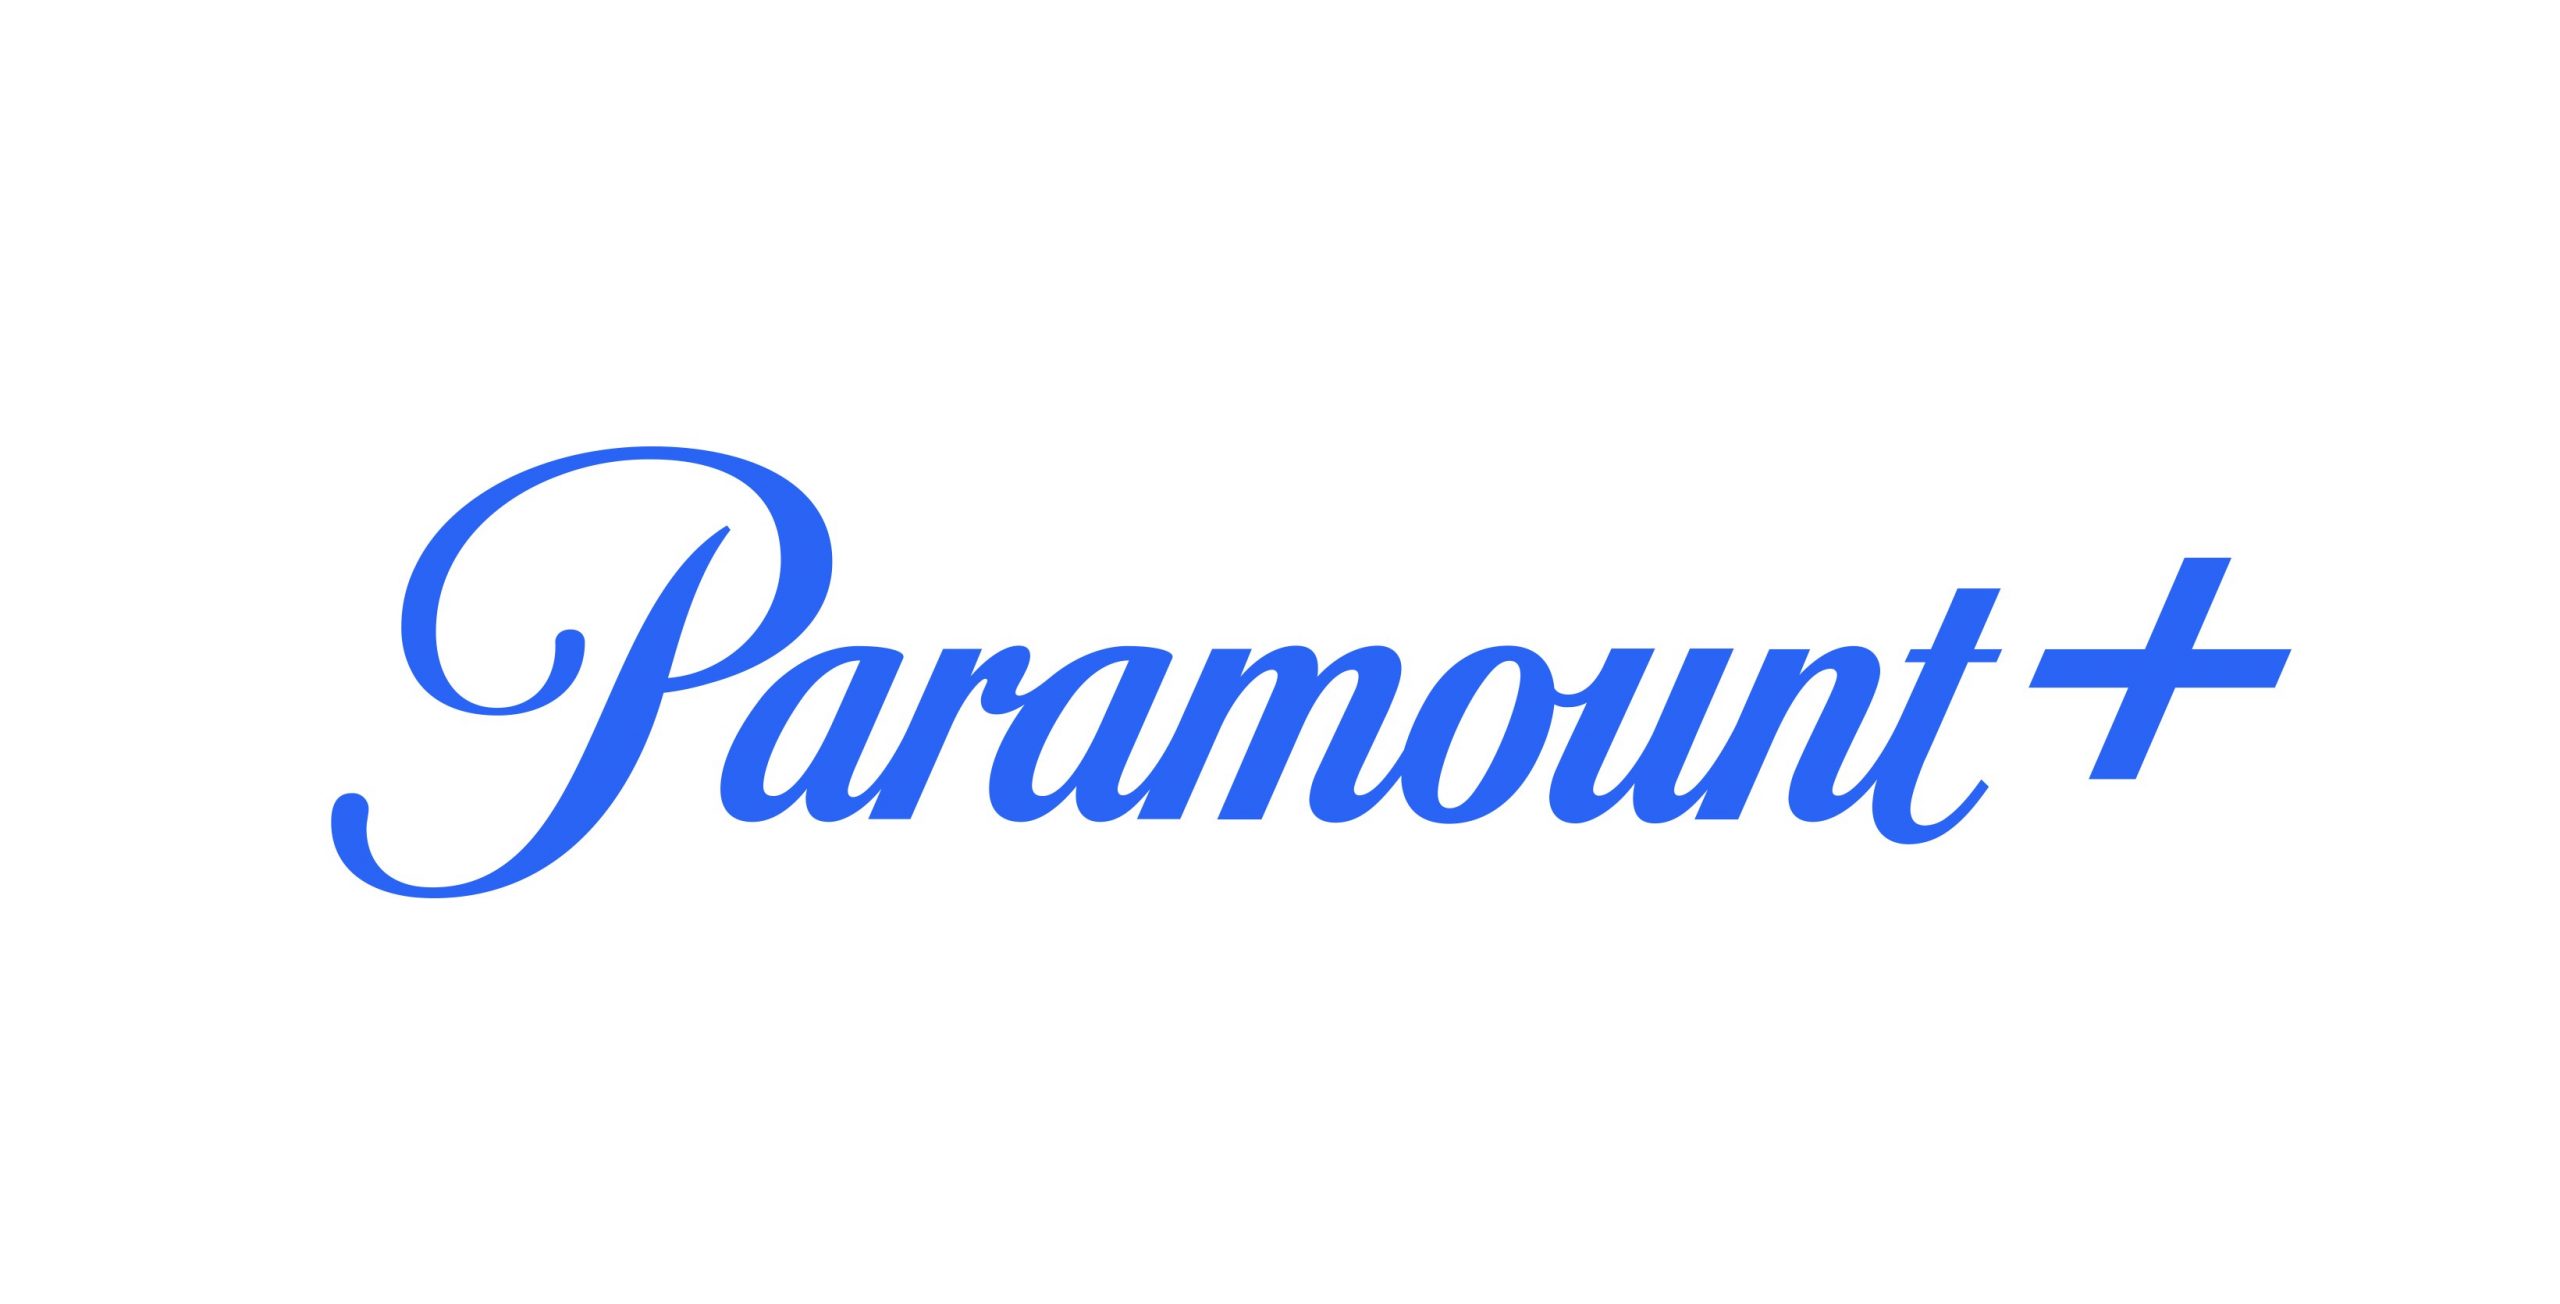 What Time Does Paramount Plus Releases New Episodes?